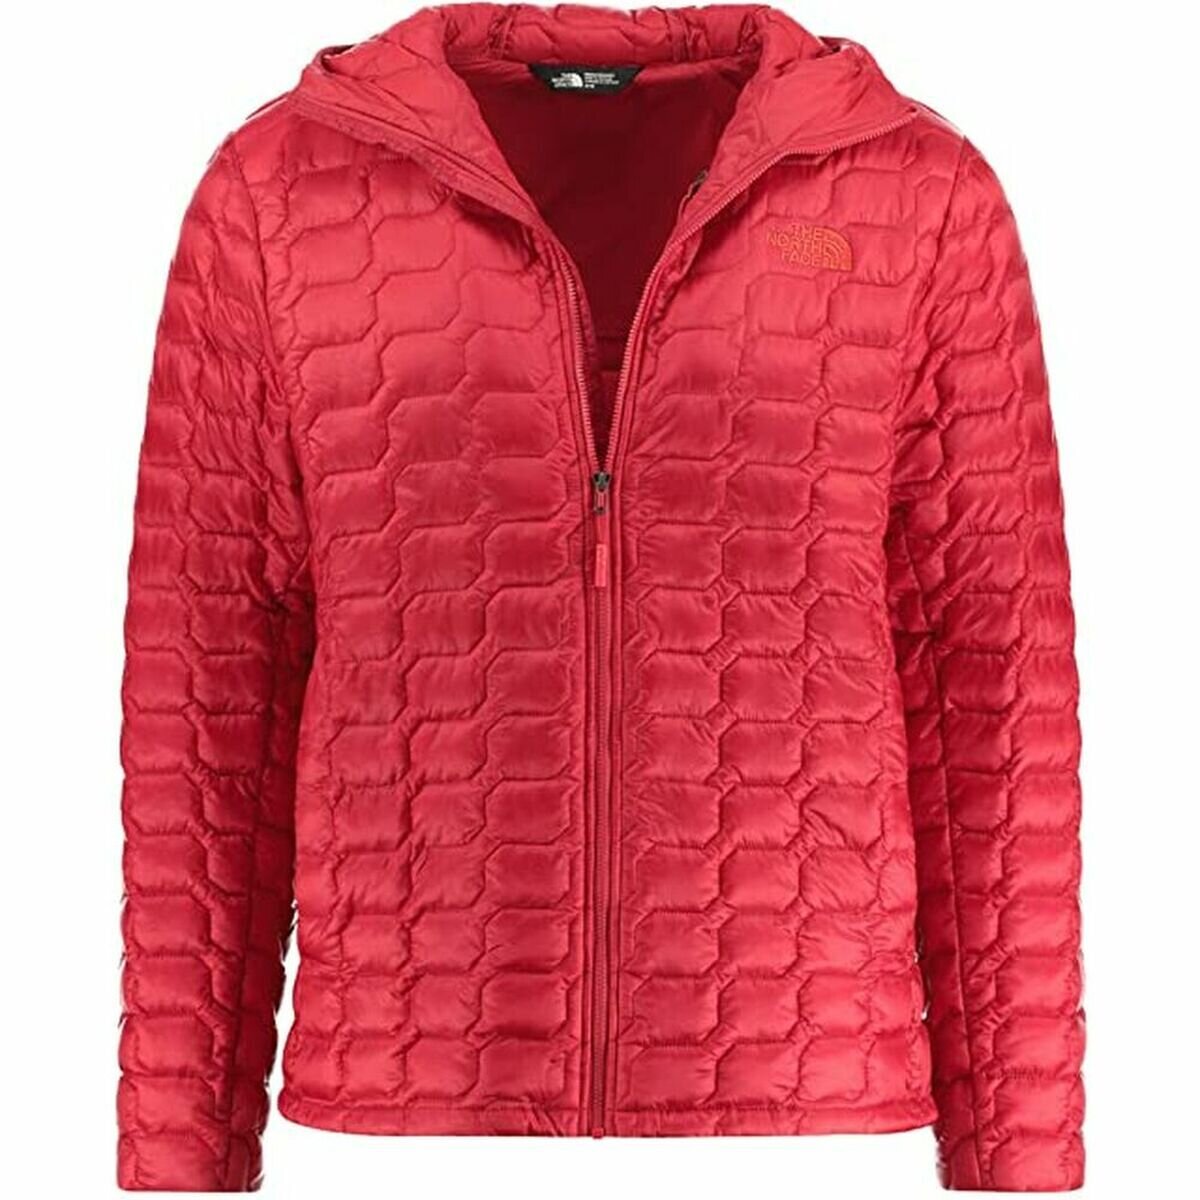 Men's North Face Sports Jacket in Red